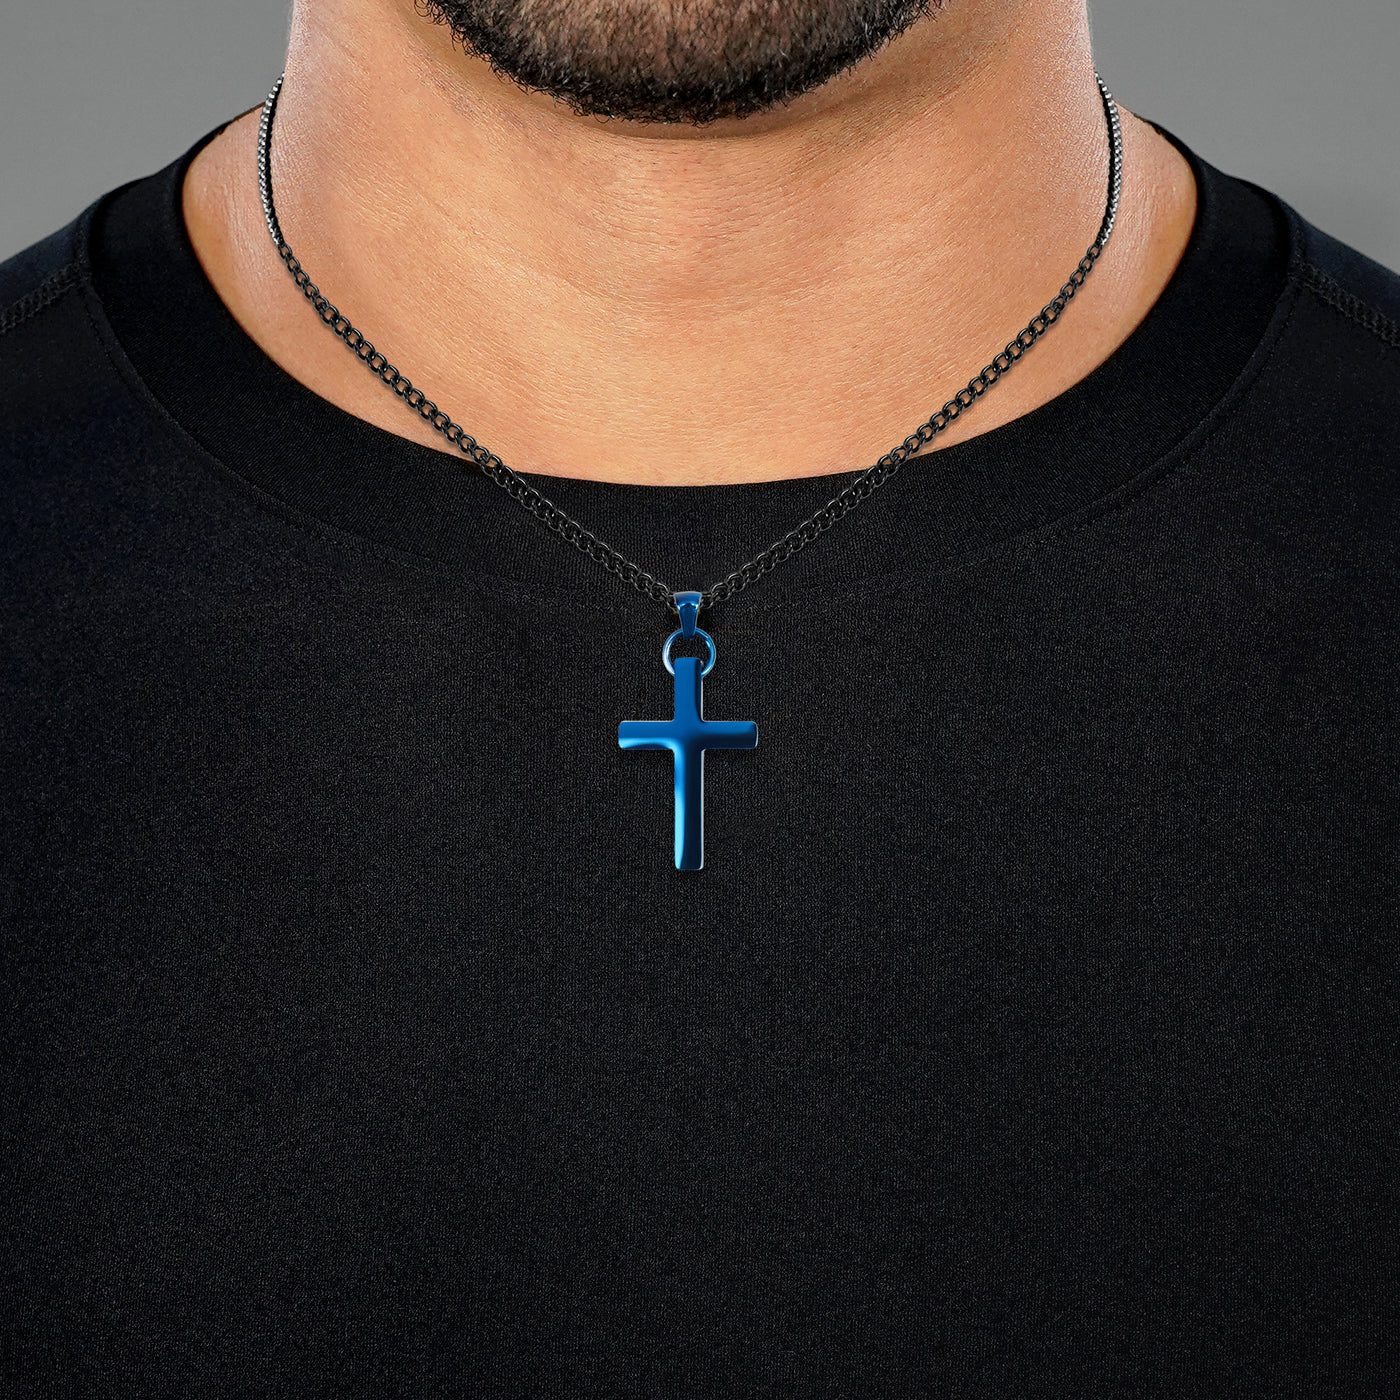 Faith Cross Pendant with Chain Necklace - Cobalt Blue Stainless Steel